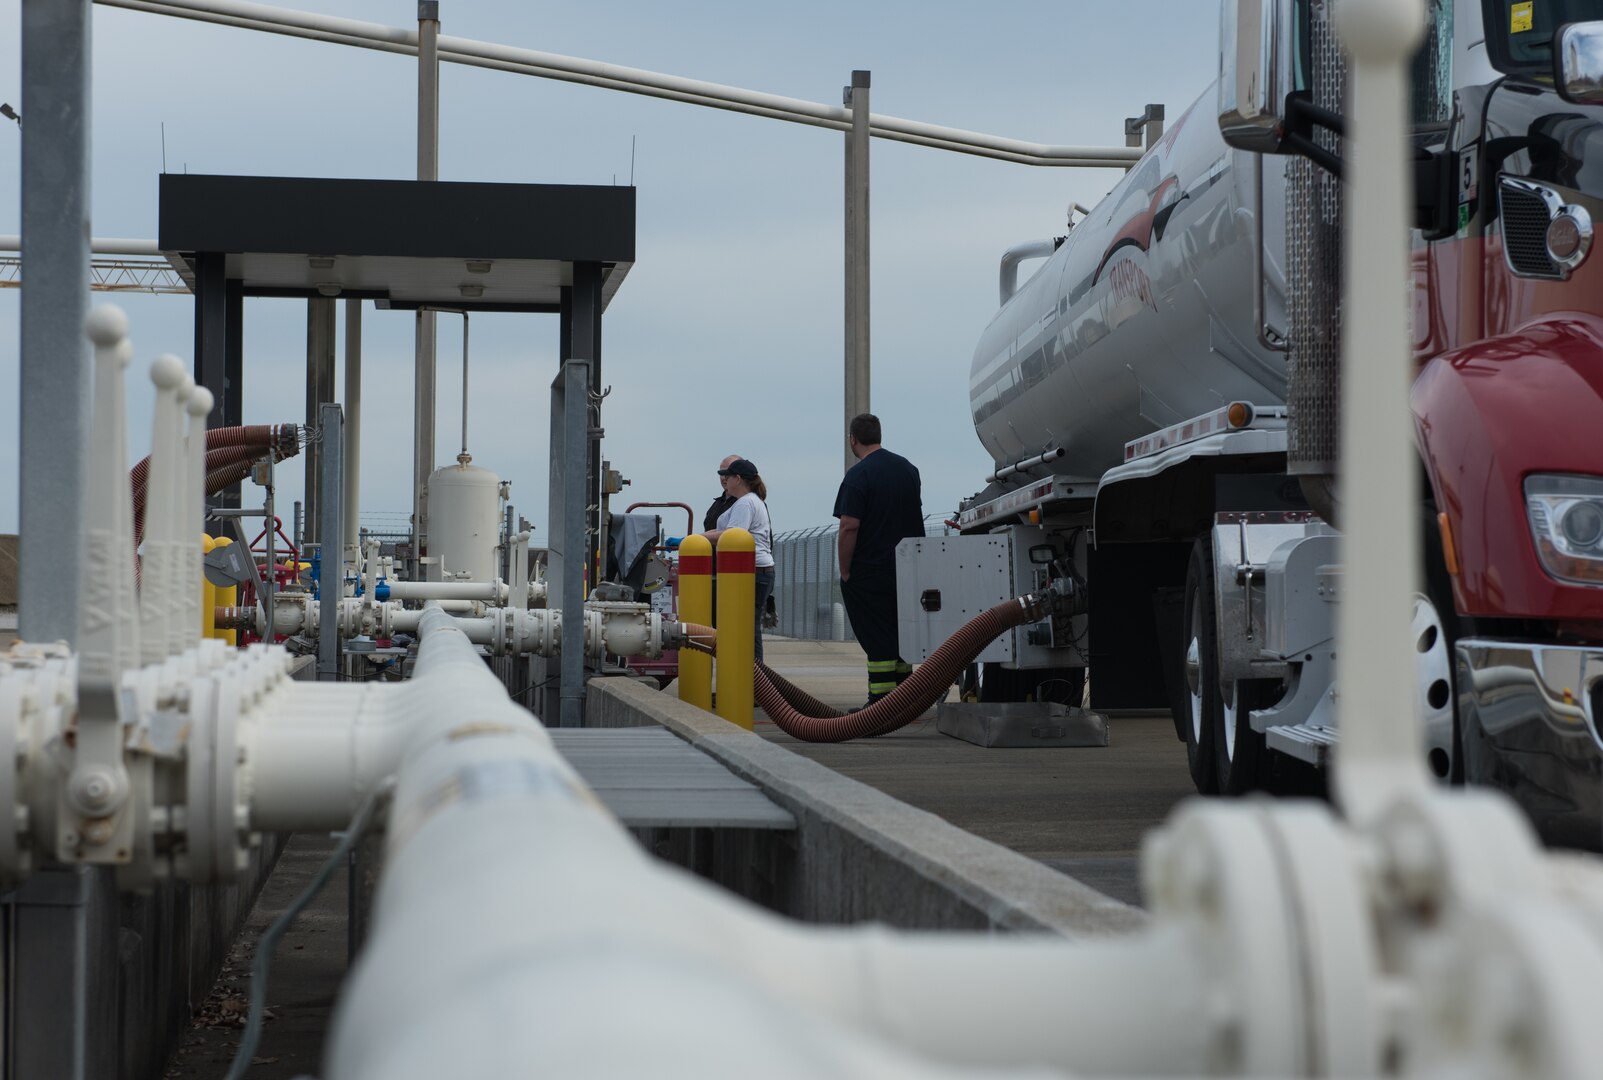 Fuel is pumped through pipes into tanks at Joint Base Langley-Eustis, Virginia, March 10, 2020. Fuel is primarily delivered by barge to JBLE but trucks are the secondary delivery source. (U.S. Air Force photo by Airman 1st Class Sarah Dowe)